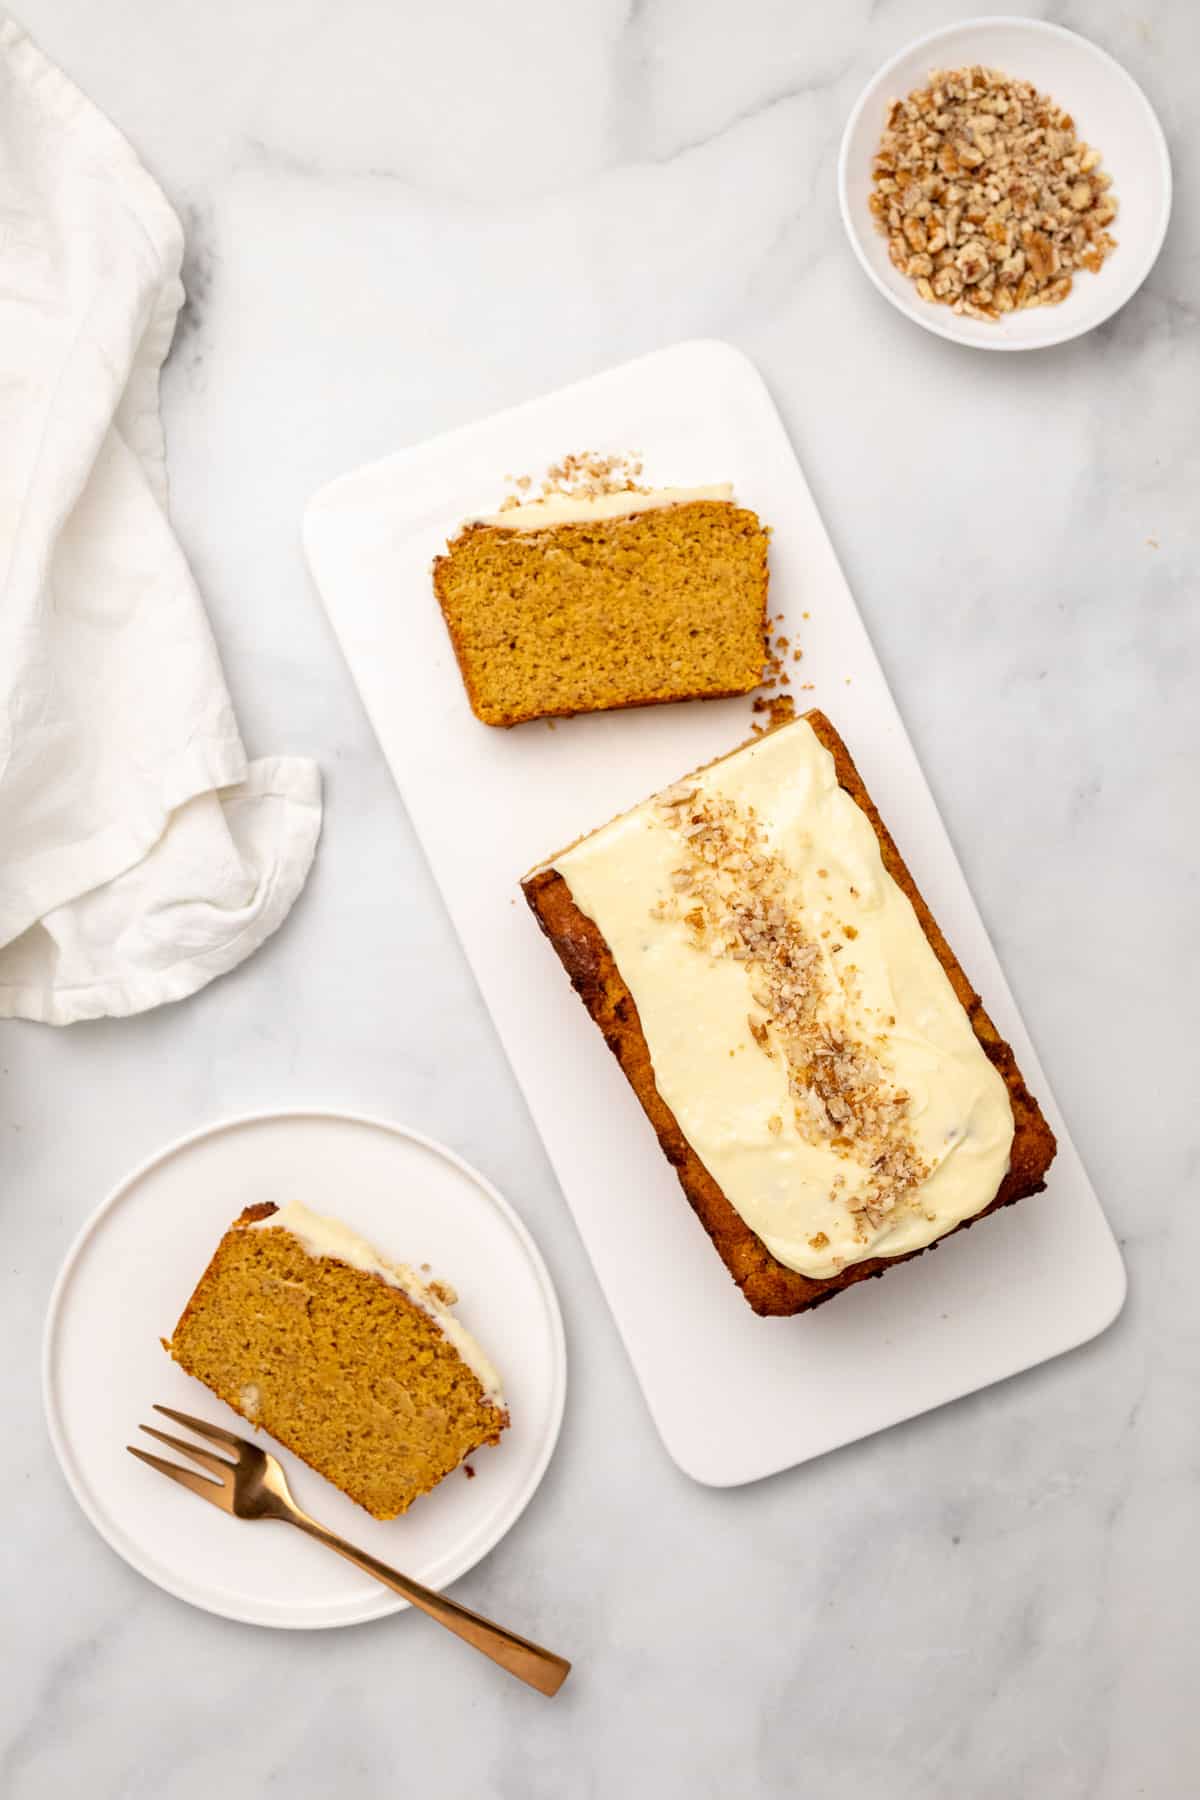 Pumpkin loaf on a serving tray next to a plate with a slice and a bowl for chopped nuts